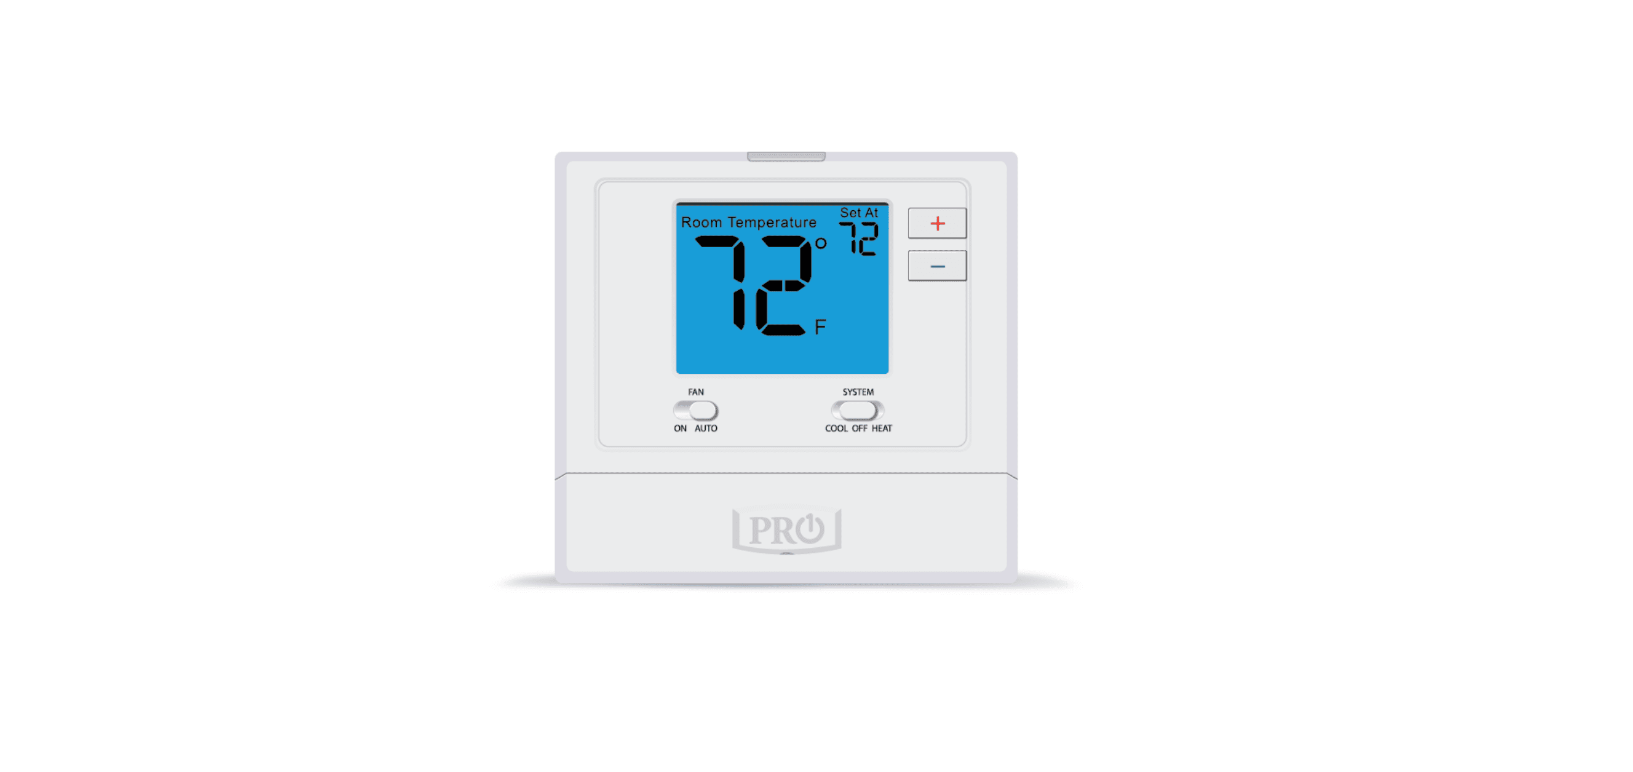 Pro1 T755s Non-Programmable Thermostats Operation Manual